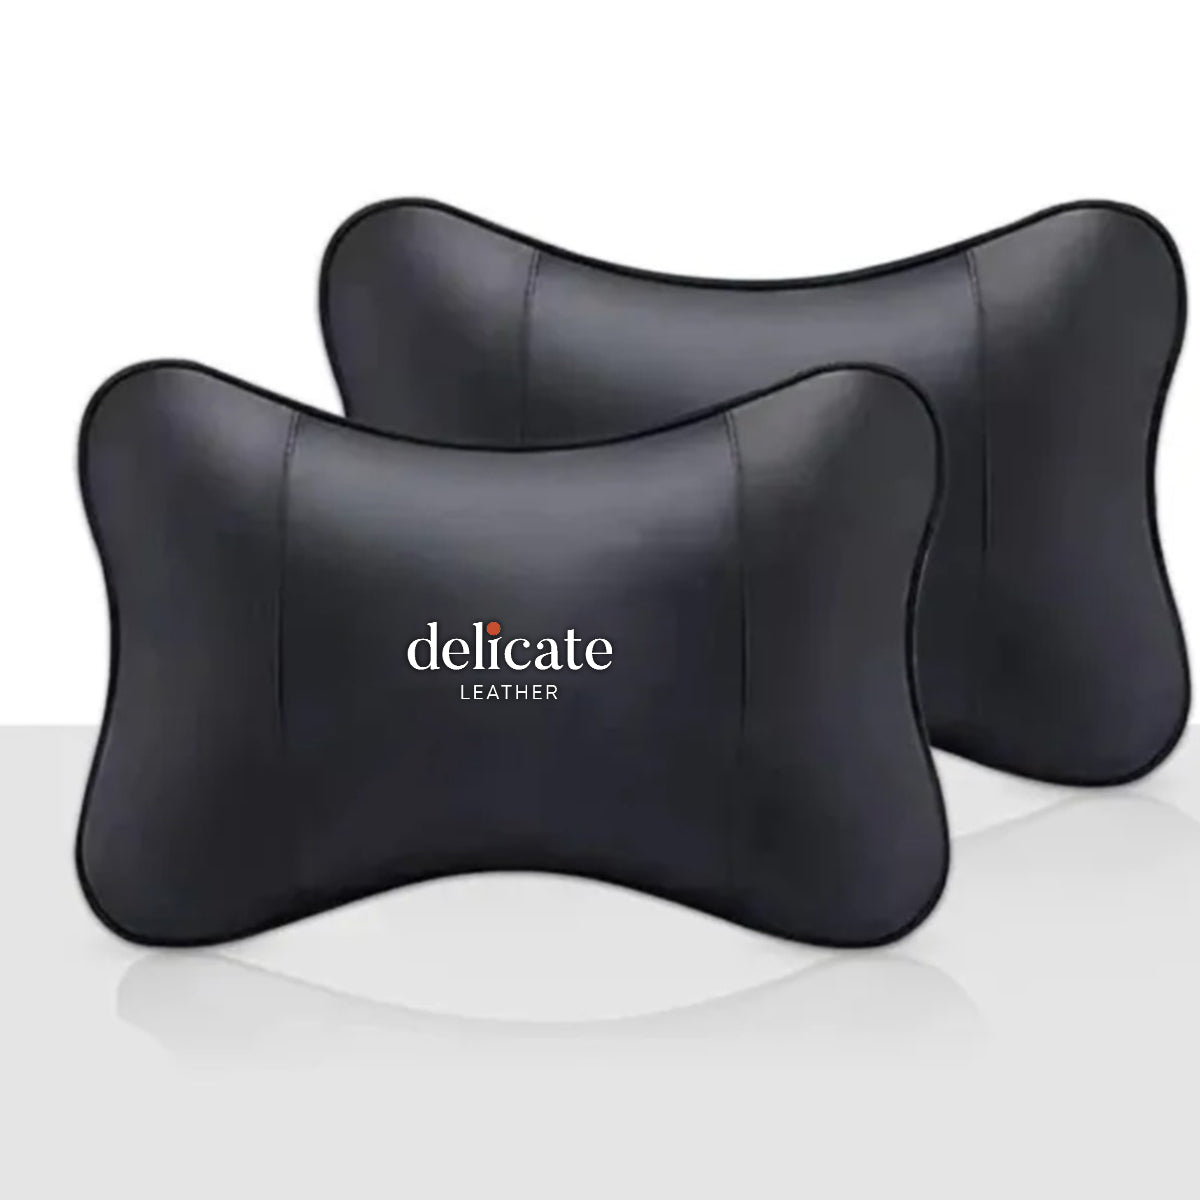 Delicate Leather Car Seat Headrests Enhance Comfort and Safety for Your Drive